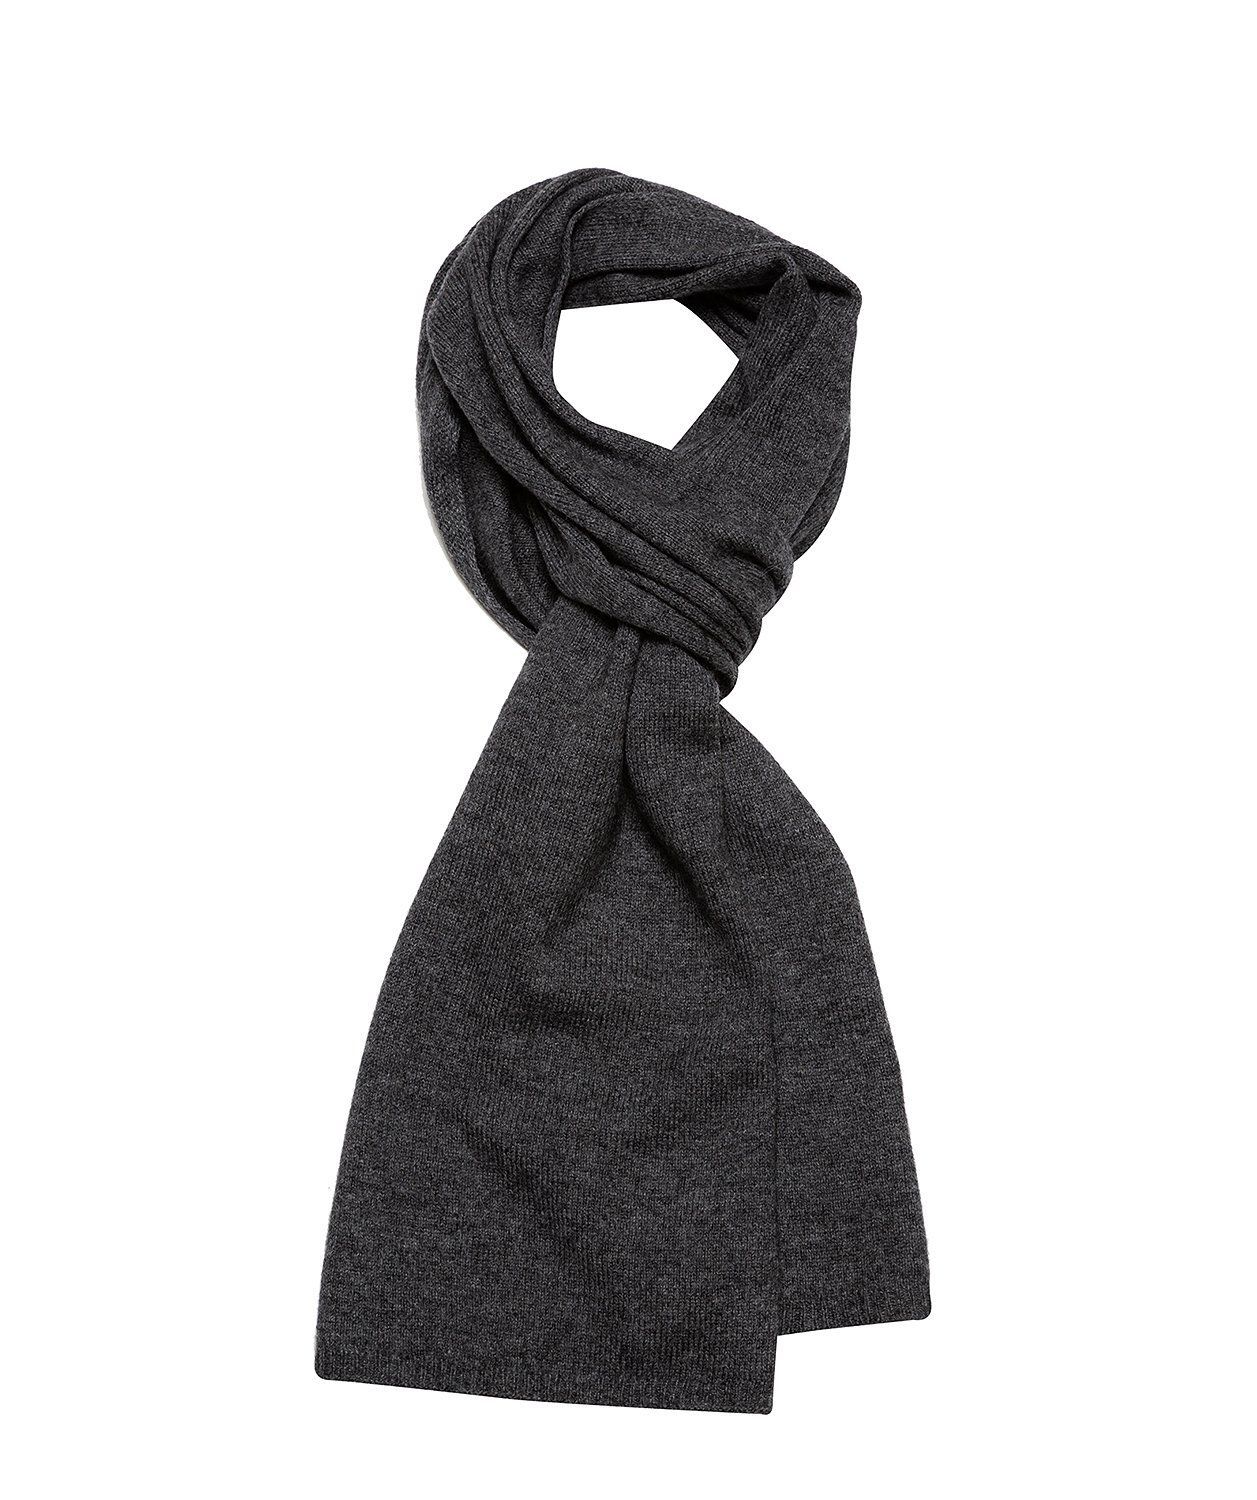 Grey Cashmere Scarve 'Edinburgh' by Pure Luxuries – Pure Luxuries London